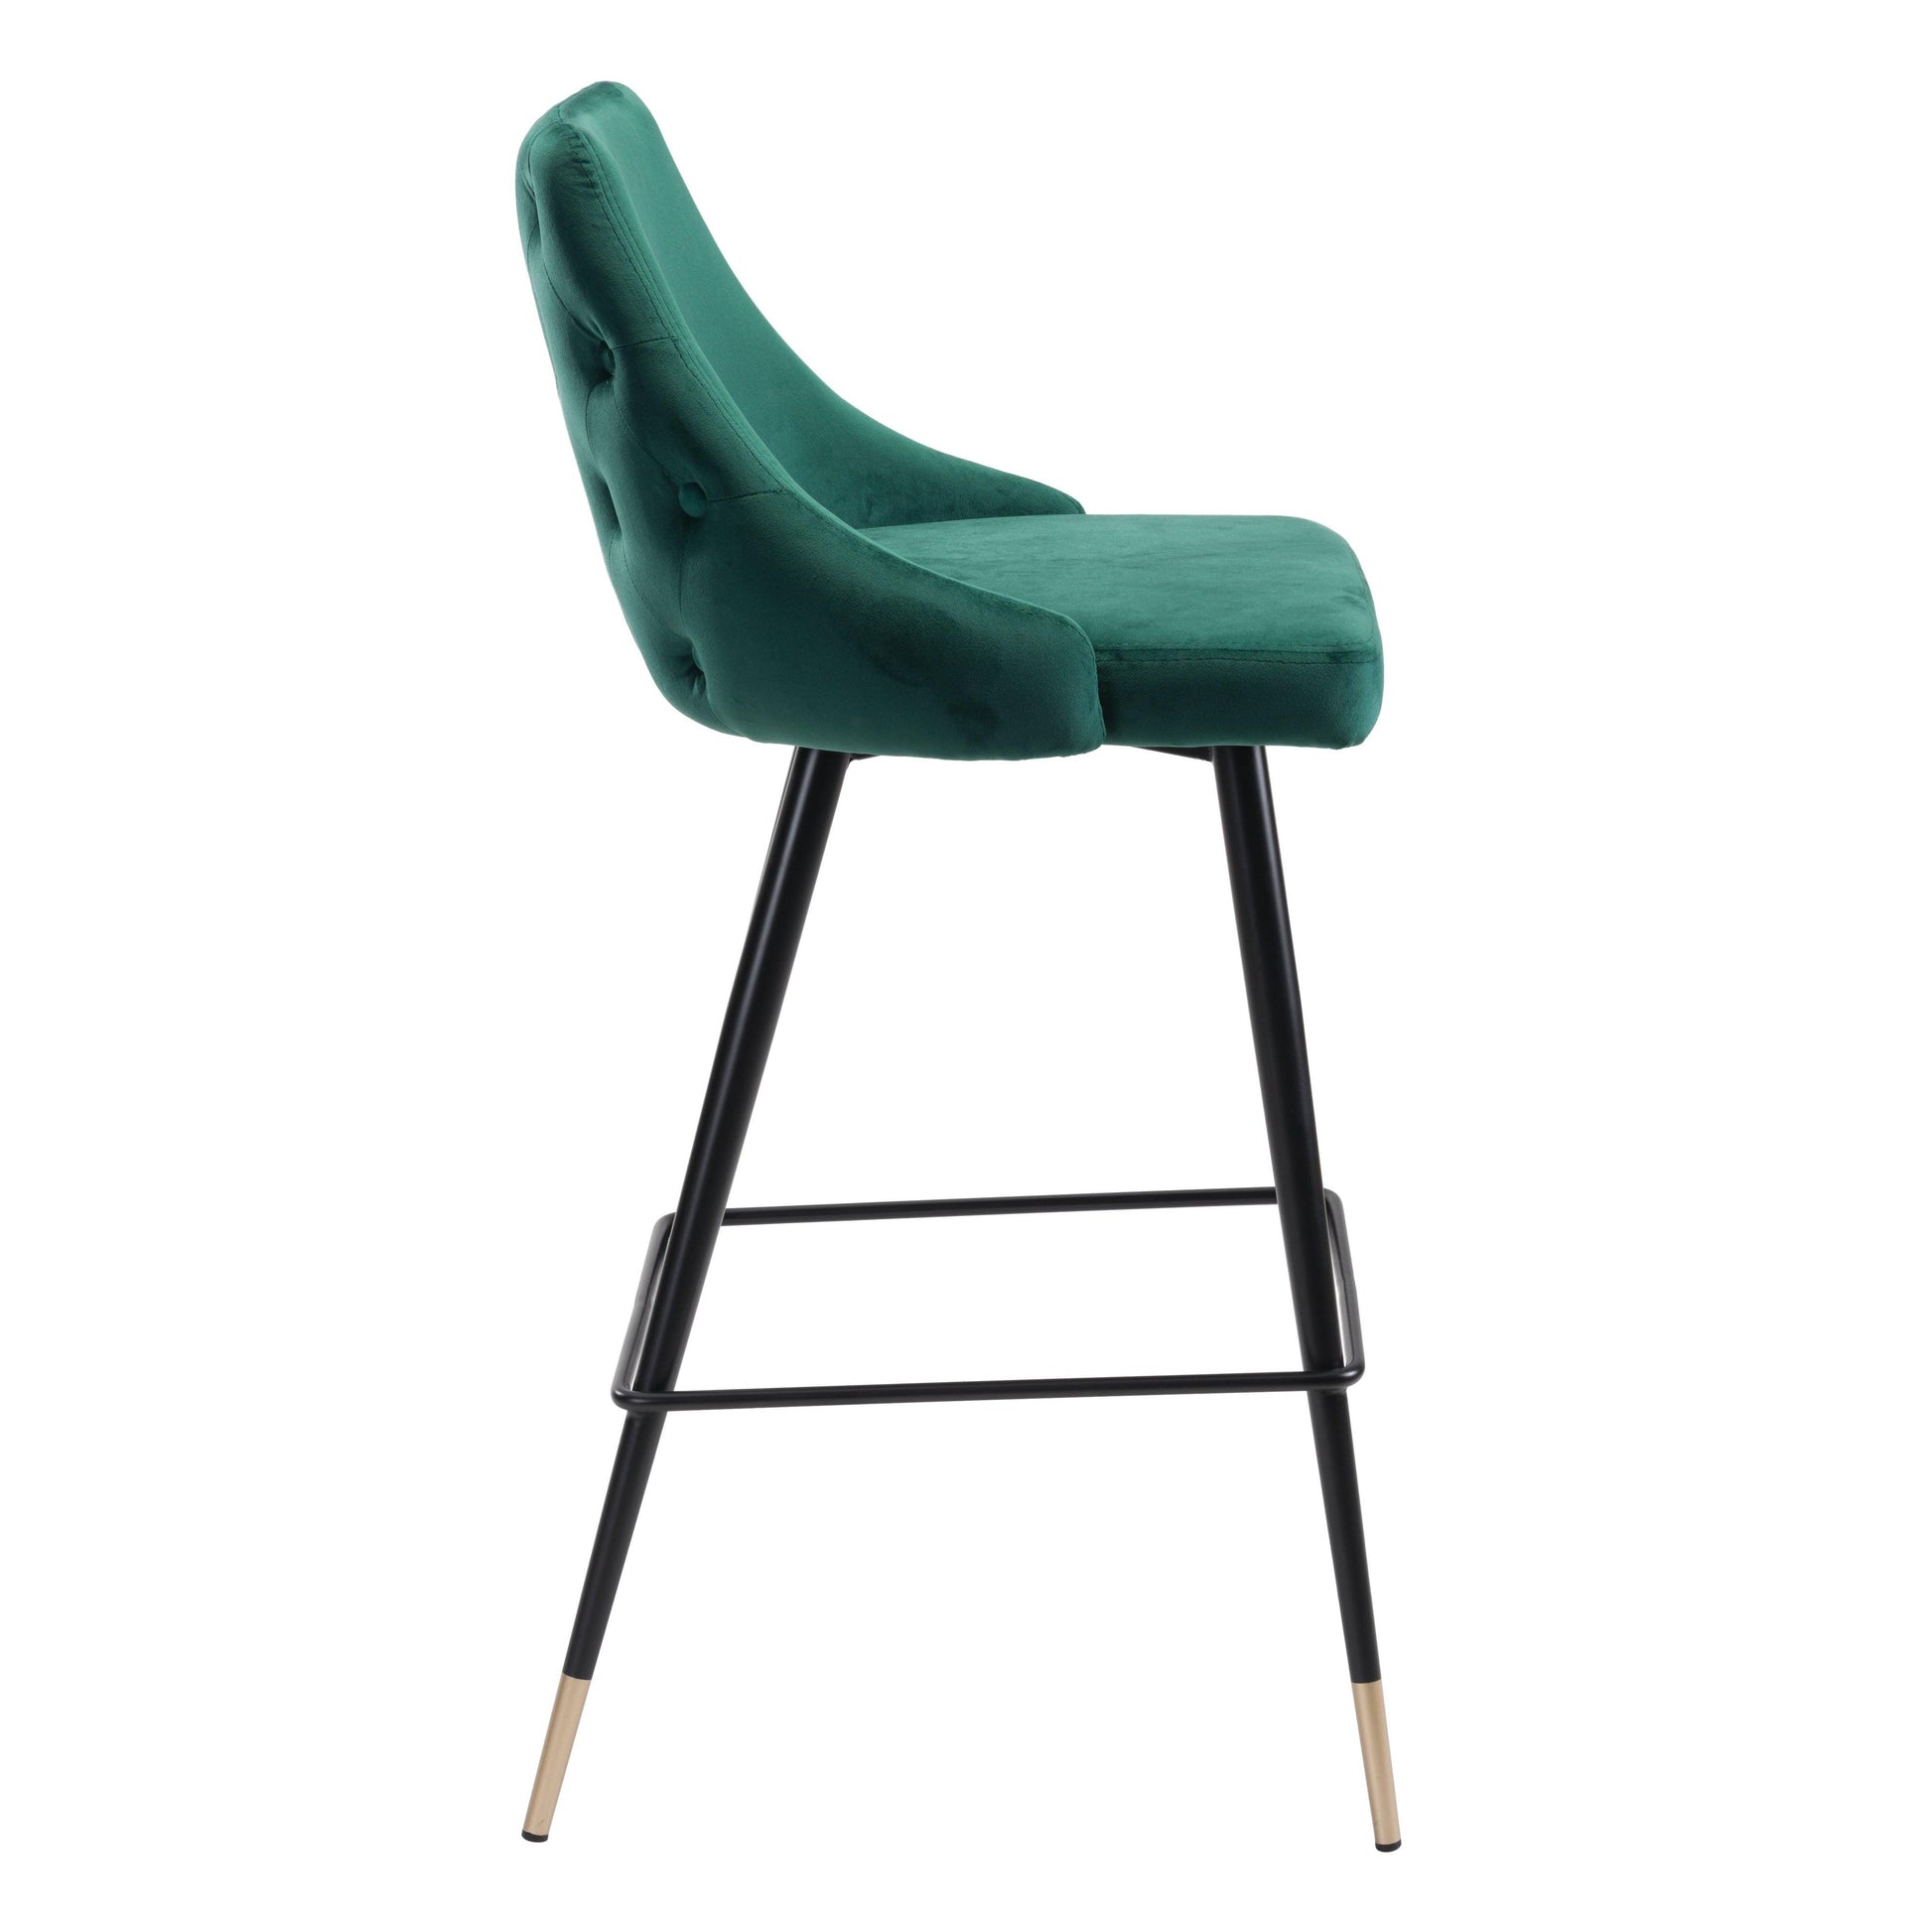 Piccolo Bar Chair Green - Sideboards and Things Accents_Black, Accents_Gold, Back Type_With Back, Brand_Zuo Modern, Color_Black, Color_Gold, Color_Green, Depth_20-30, Finish_Powder Coated, Height_40-50, Materials_Metal, Metal Type_Steel, Product Type_Bar Height, Upholstery Type_Fabric Blend, Upholstery Type_Polyester, Width_10-20